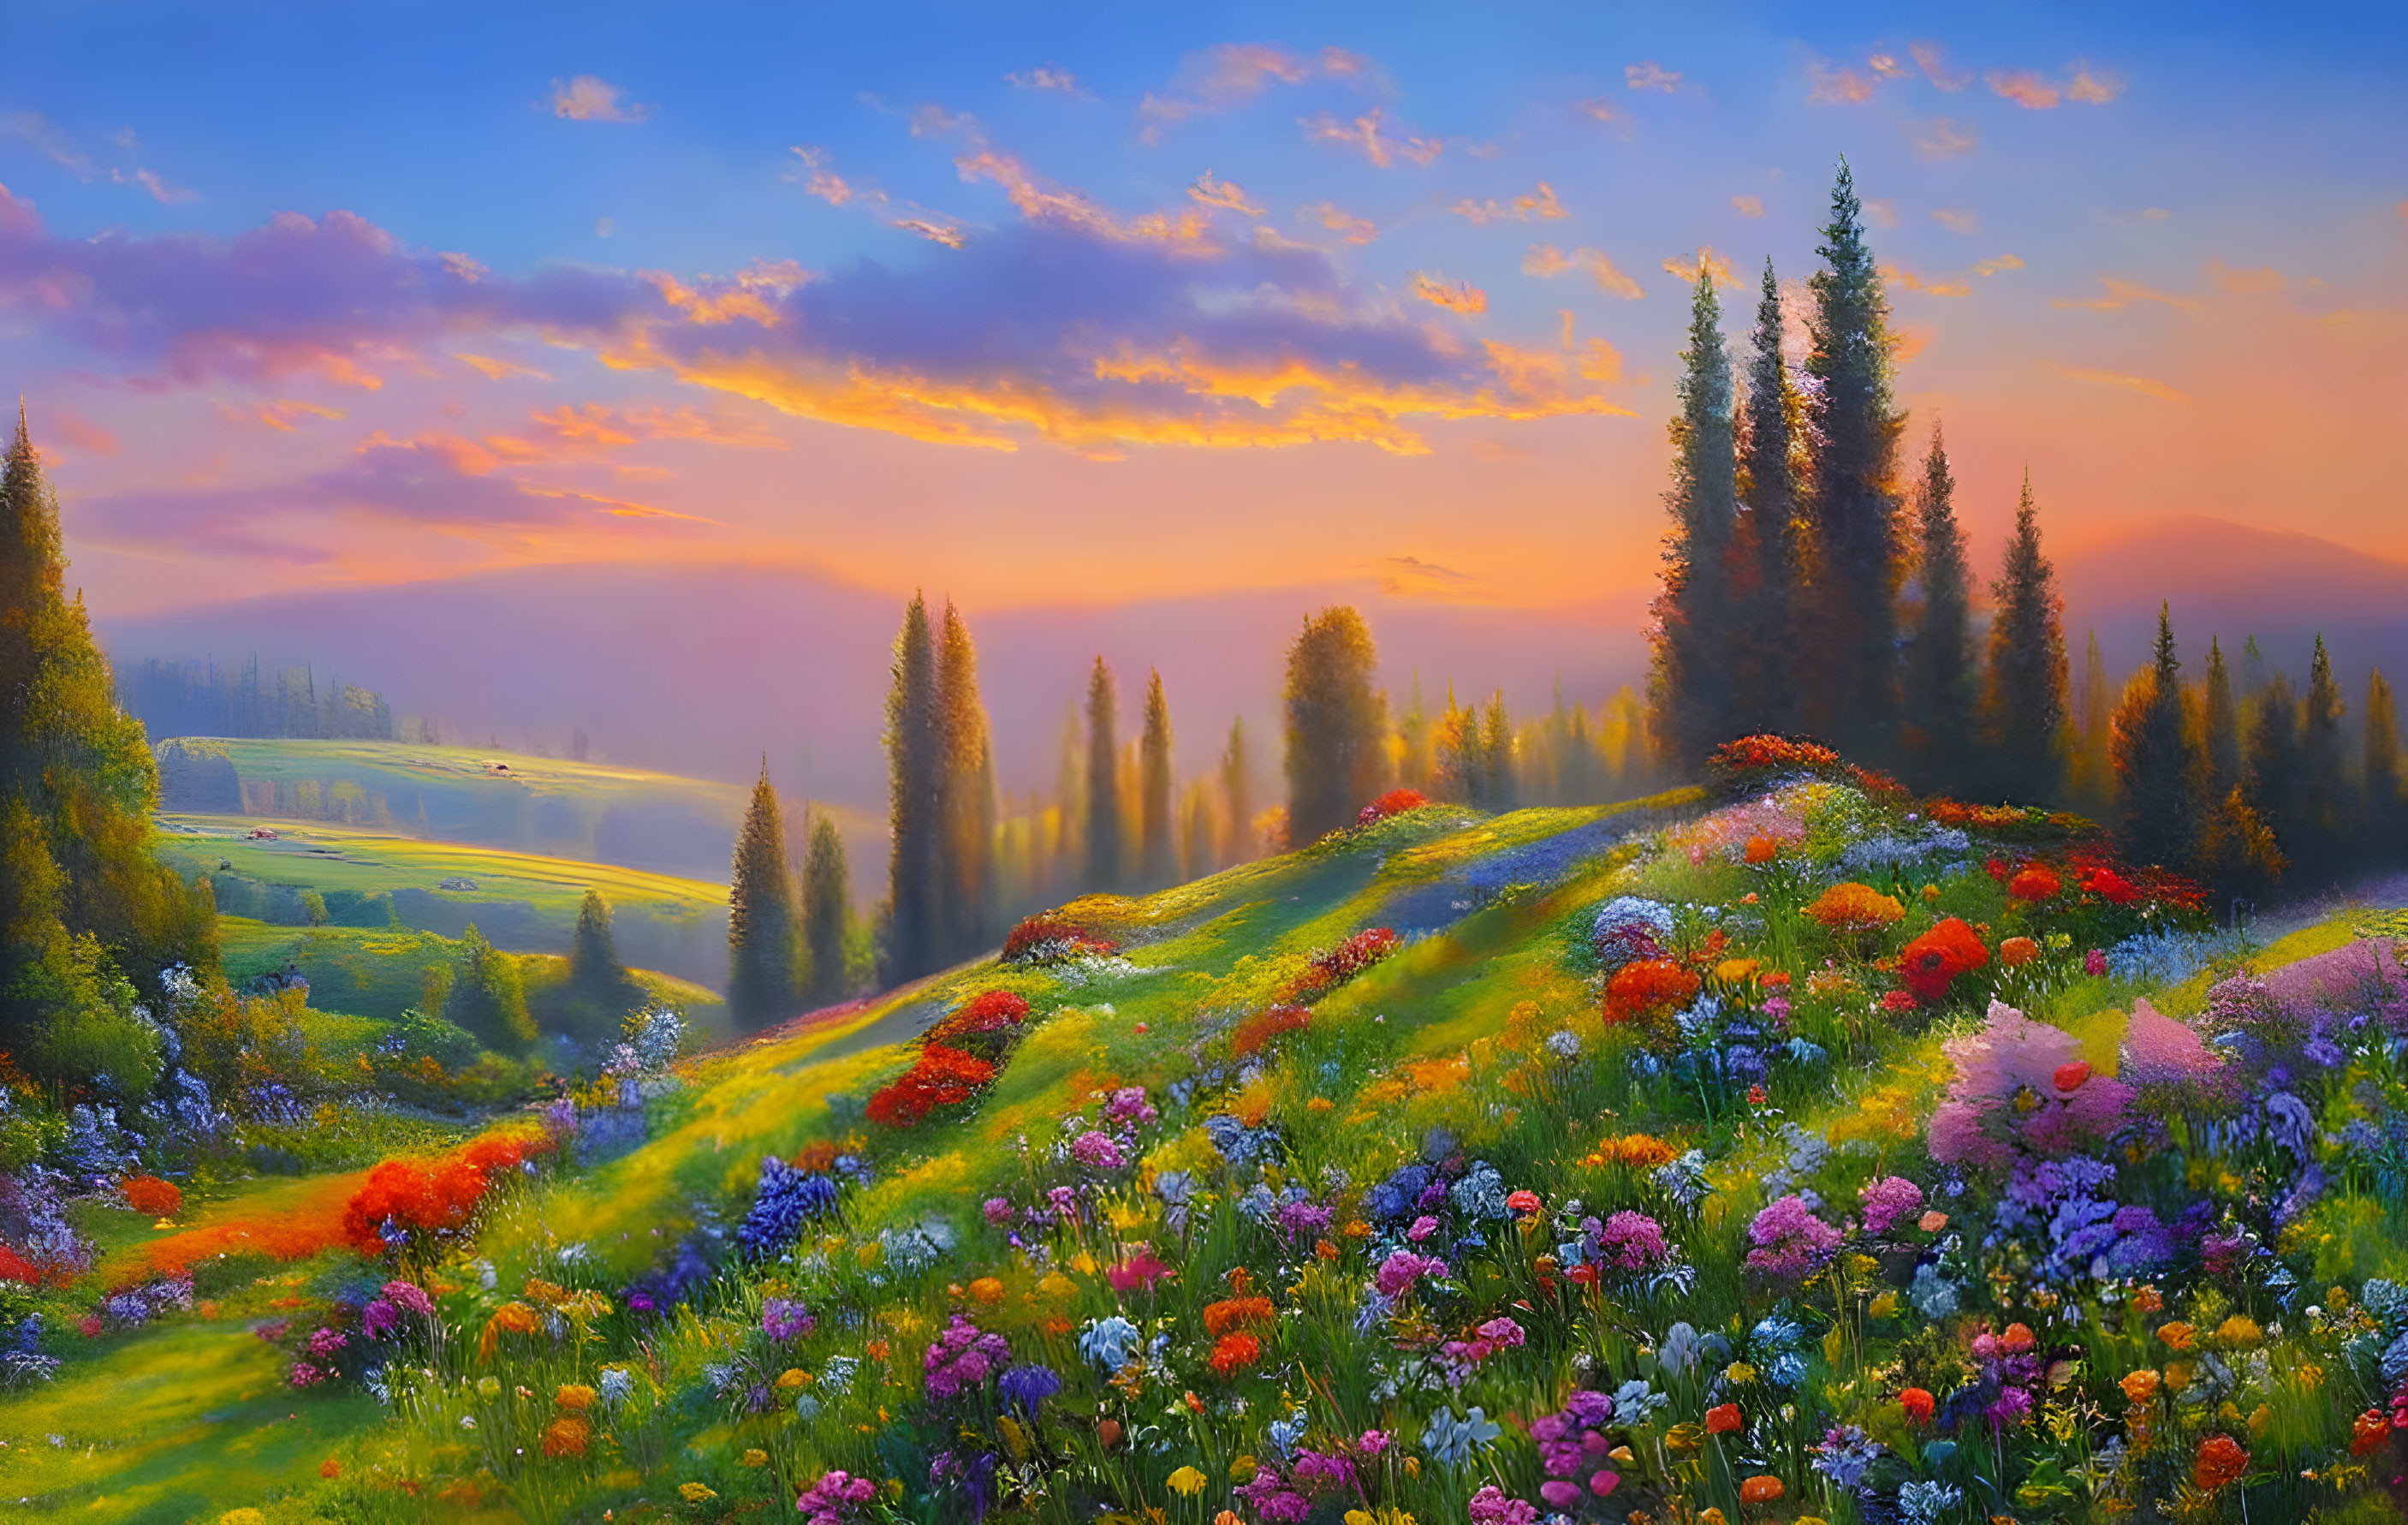 Scenic sunset landscape painting with wildflowers and pine trees